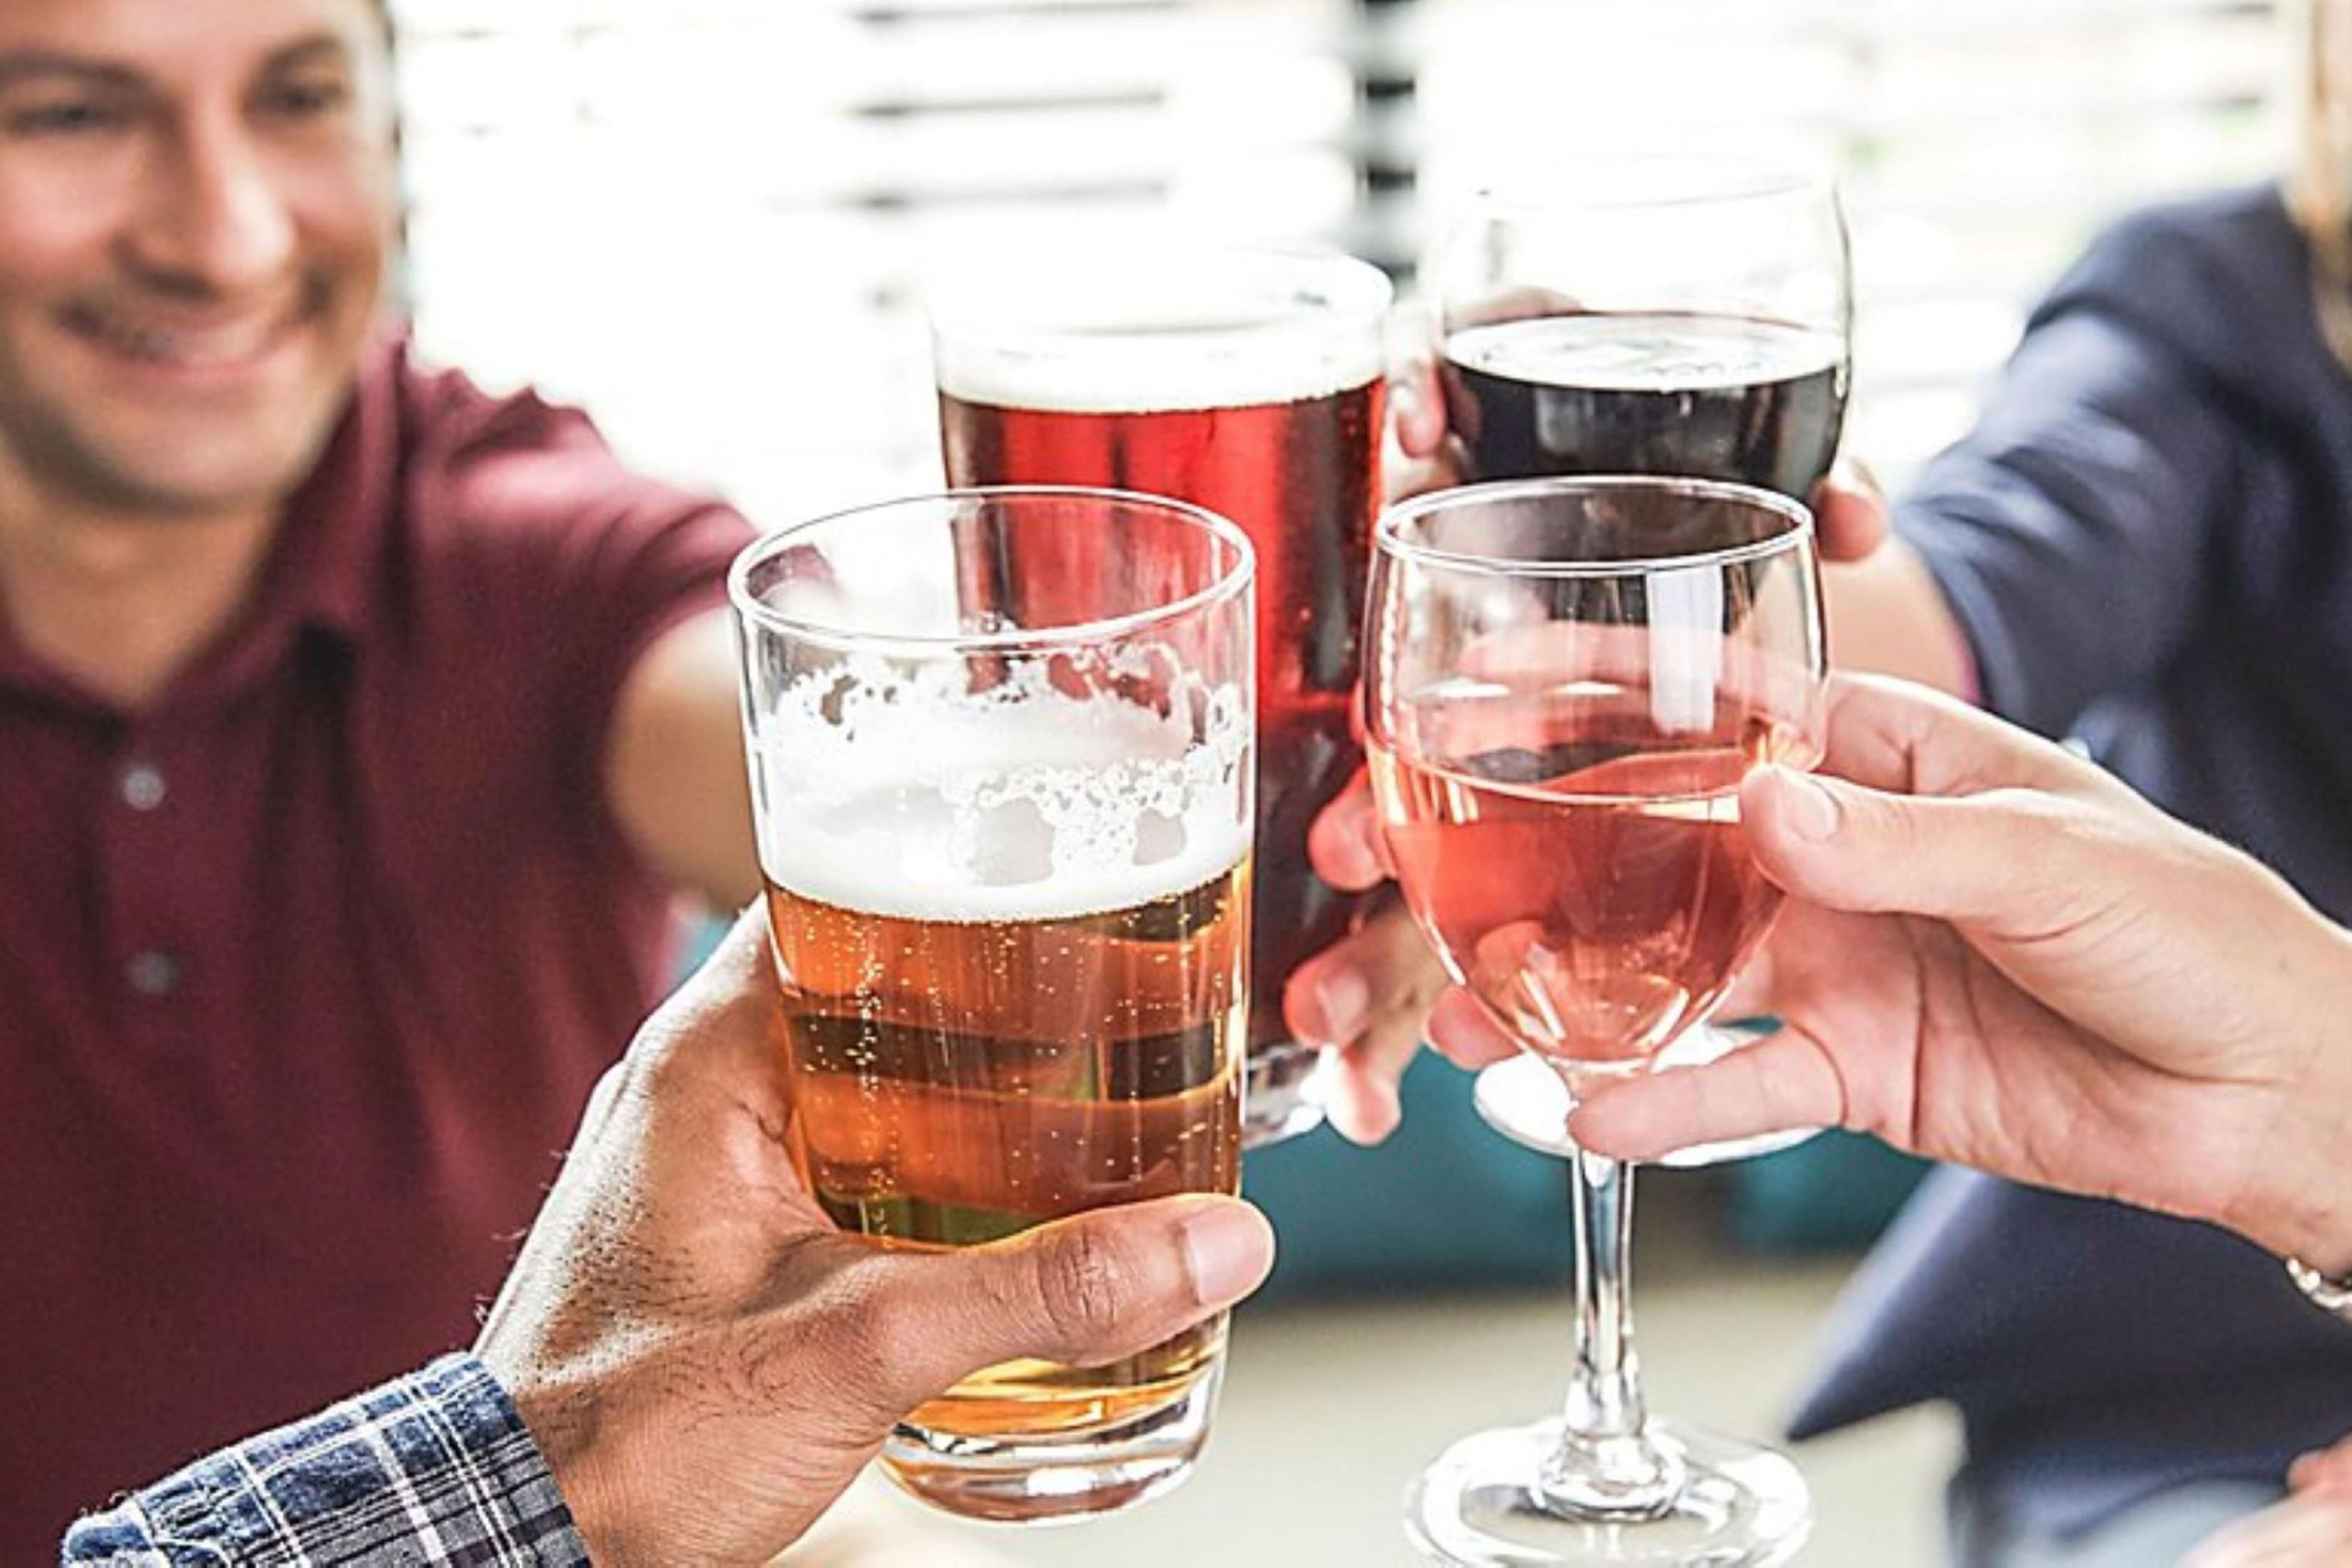 Join us Monday through Wednesday from 5:30pm-7:00pm for our Evening Social. Enjoy complimentary beer, wine, or soda as well as a light snack. Each night we have a theme. Monday is sports night, Tuesday is kids night, and Wednesday is game night!